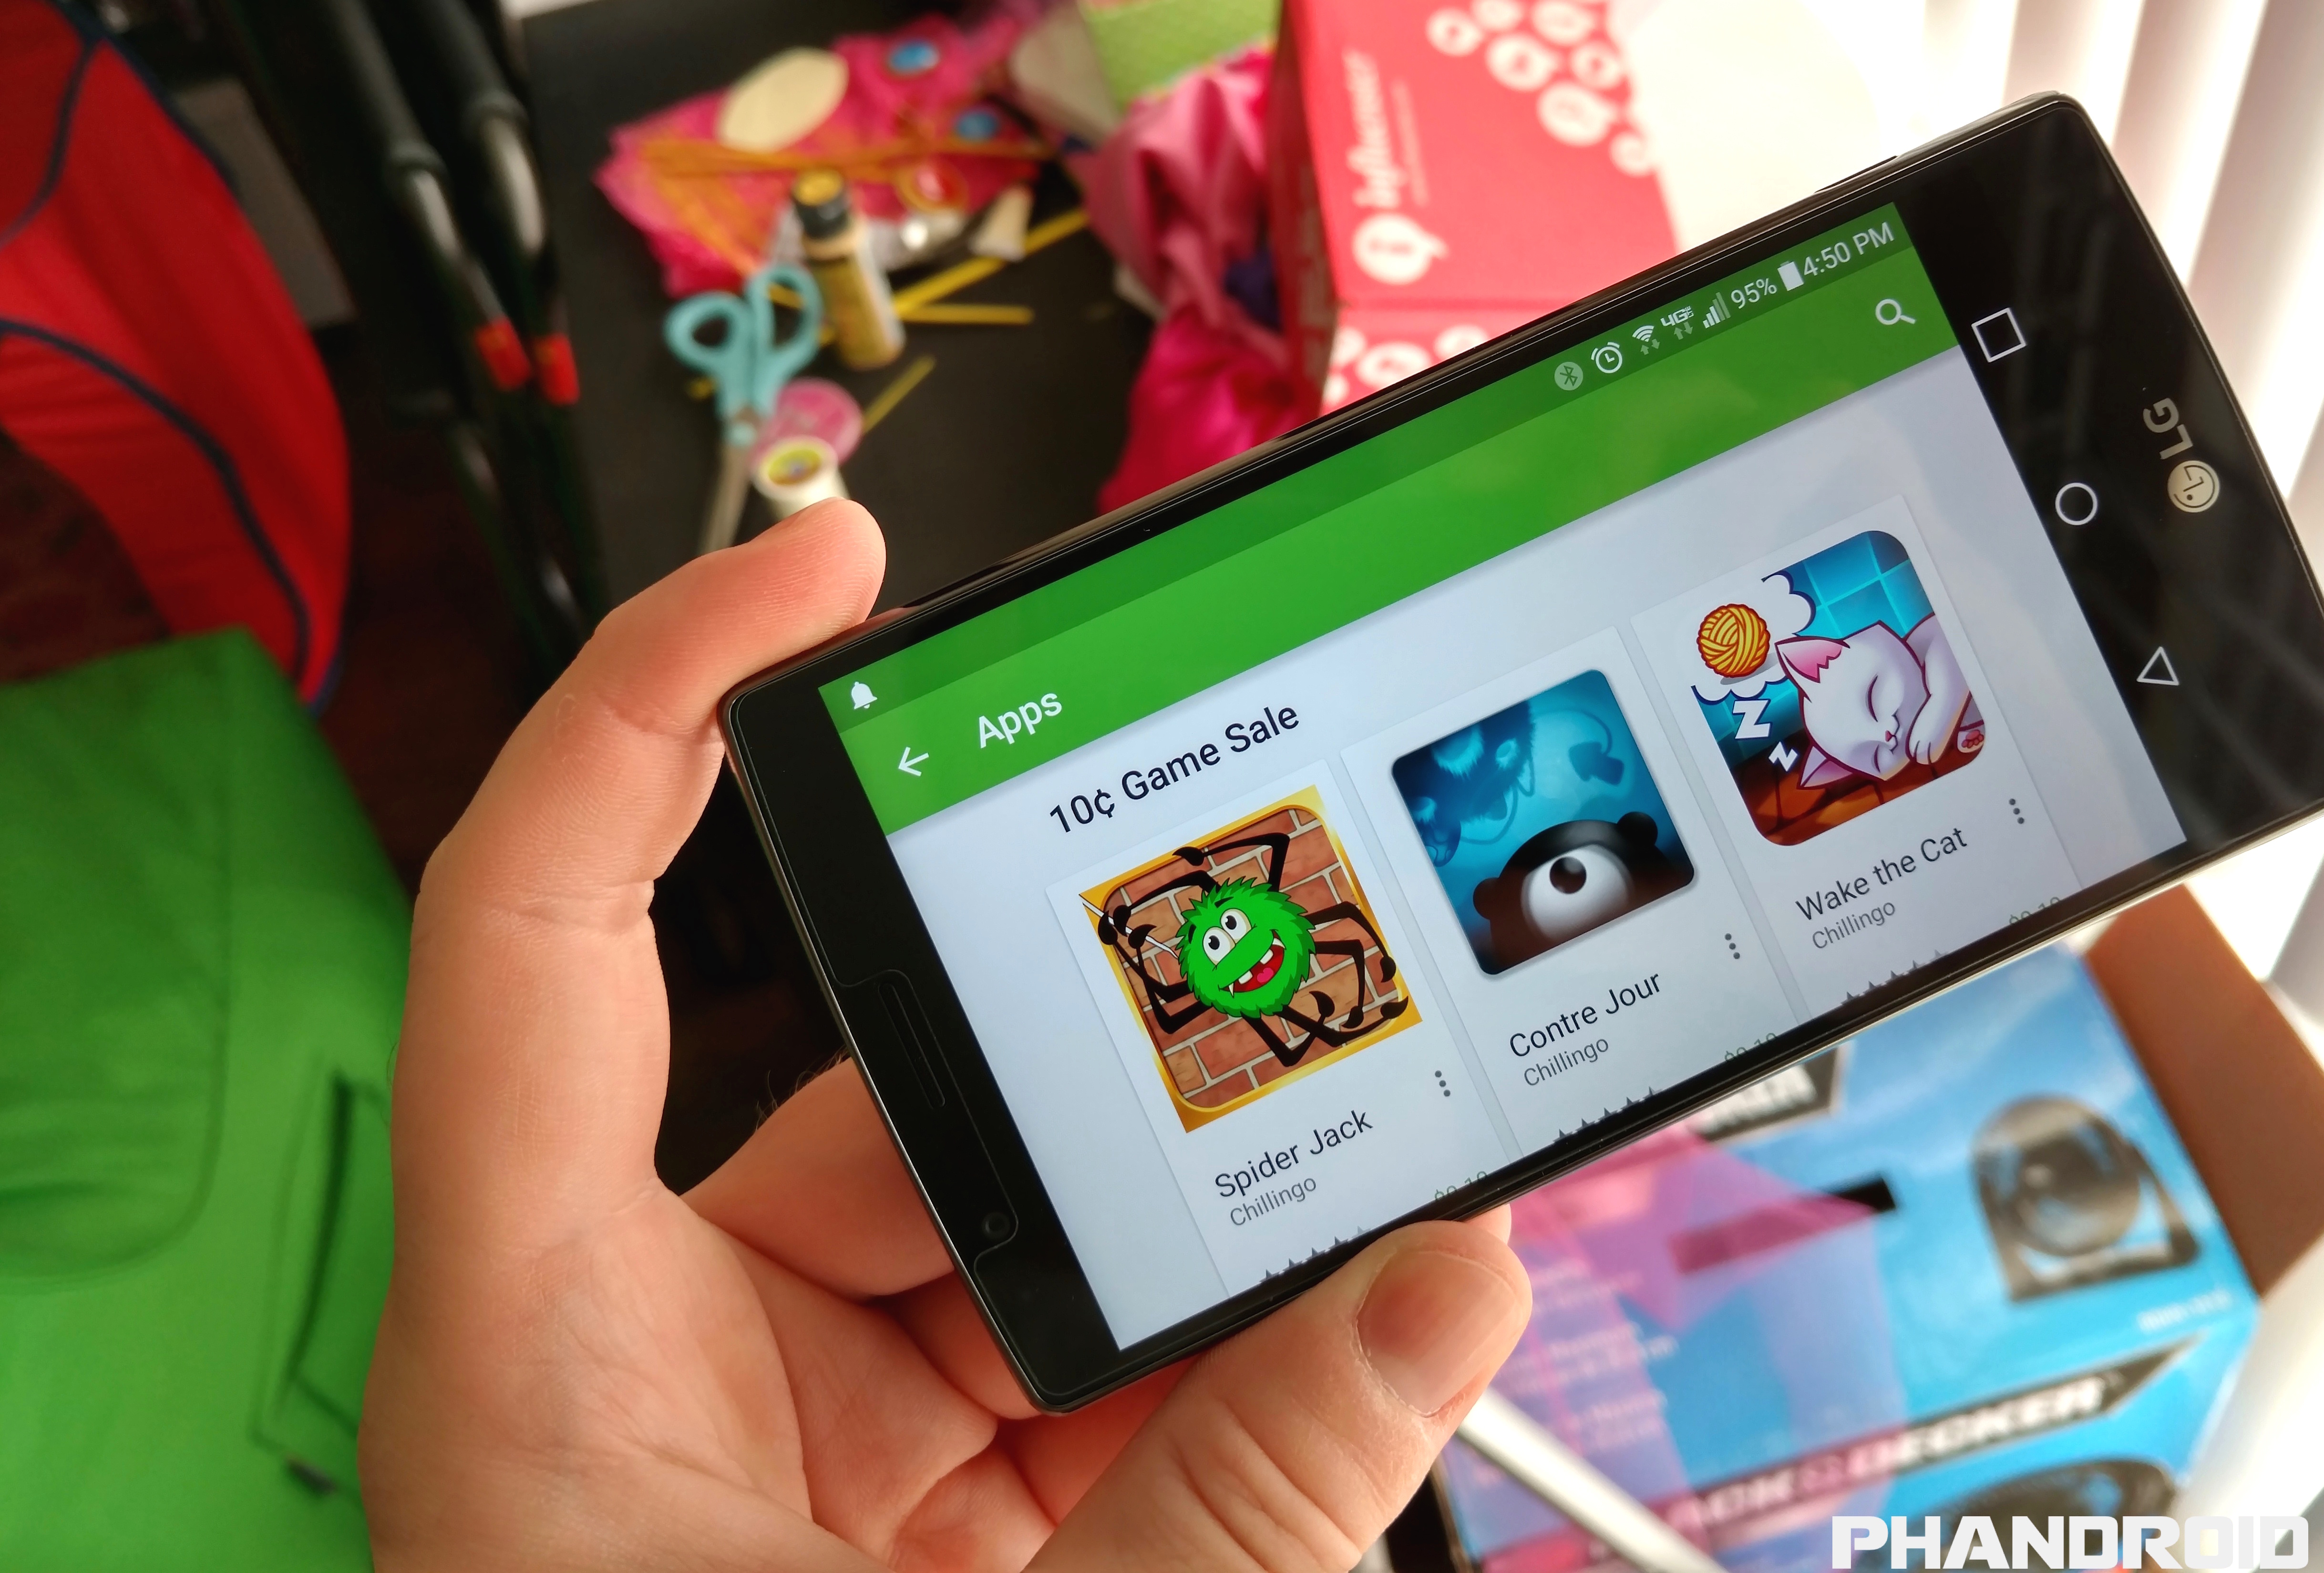 Google Play Store Has A $0.10 Cent Sale On Games - Tech My Money